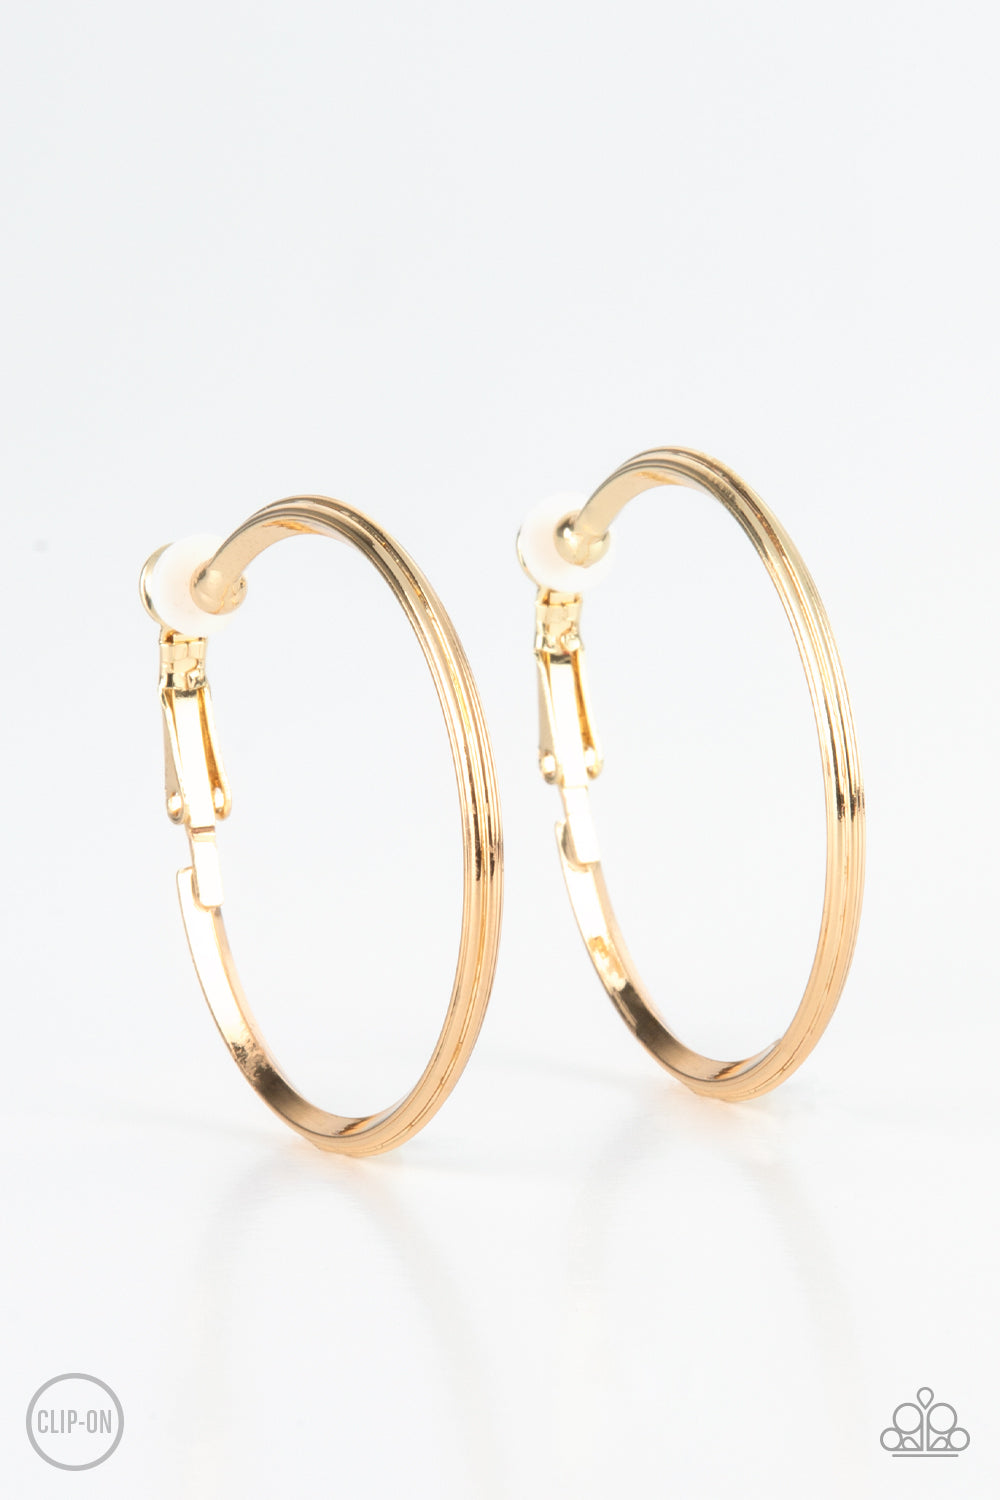 City Classic Paparazzi Accessories Clip On Hoop Earrings